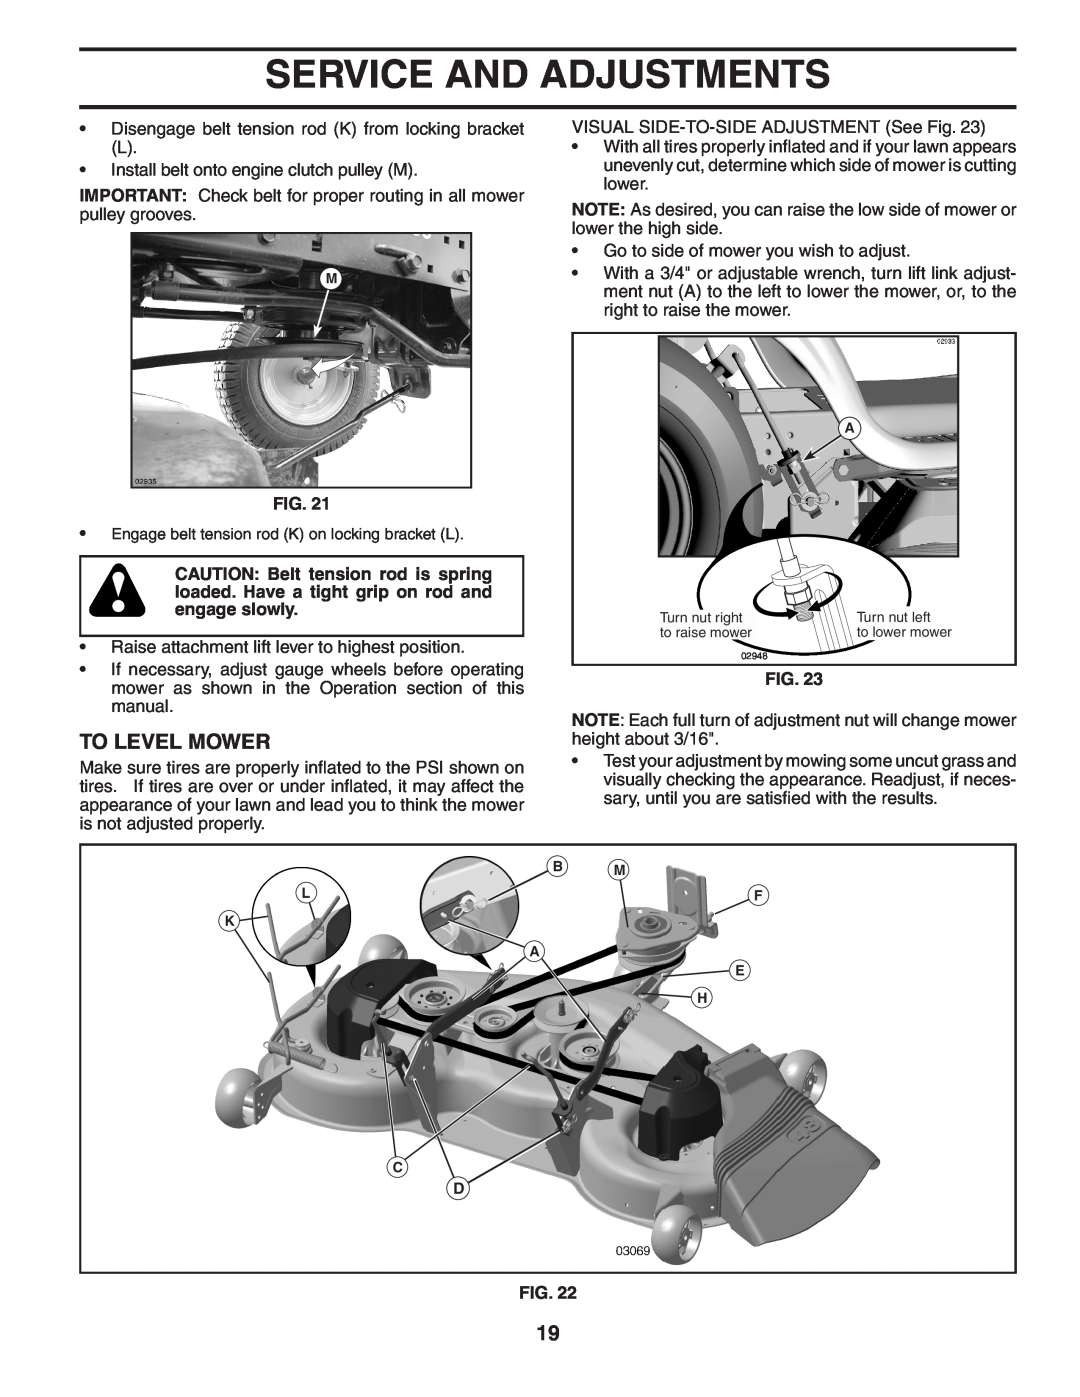 Poulan PB22H48YT manual To Level Mower, Service And Adjustments 